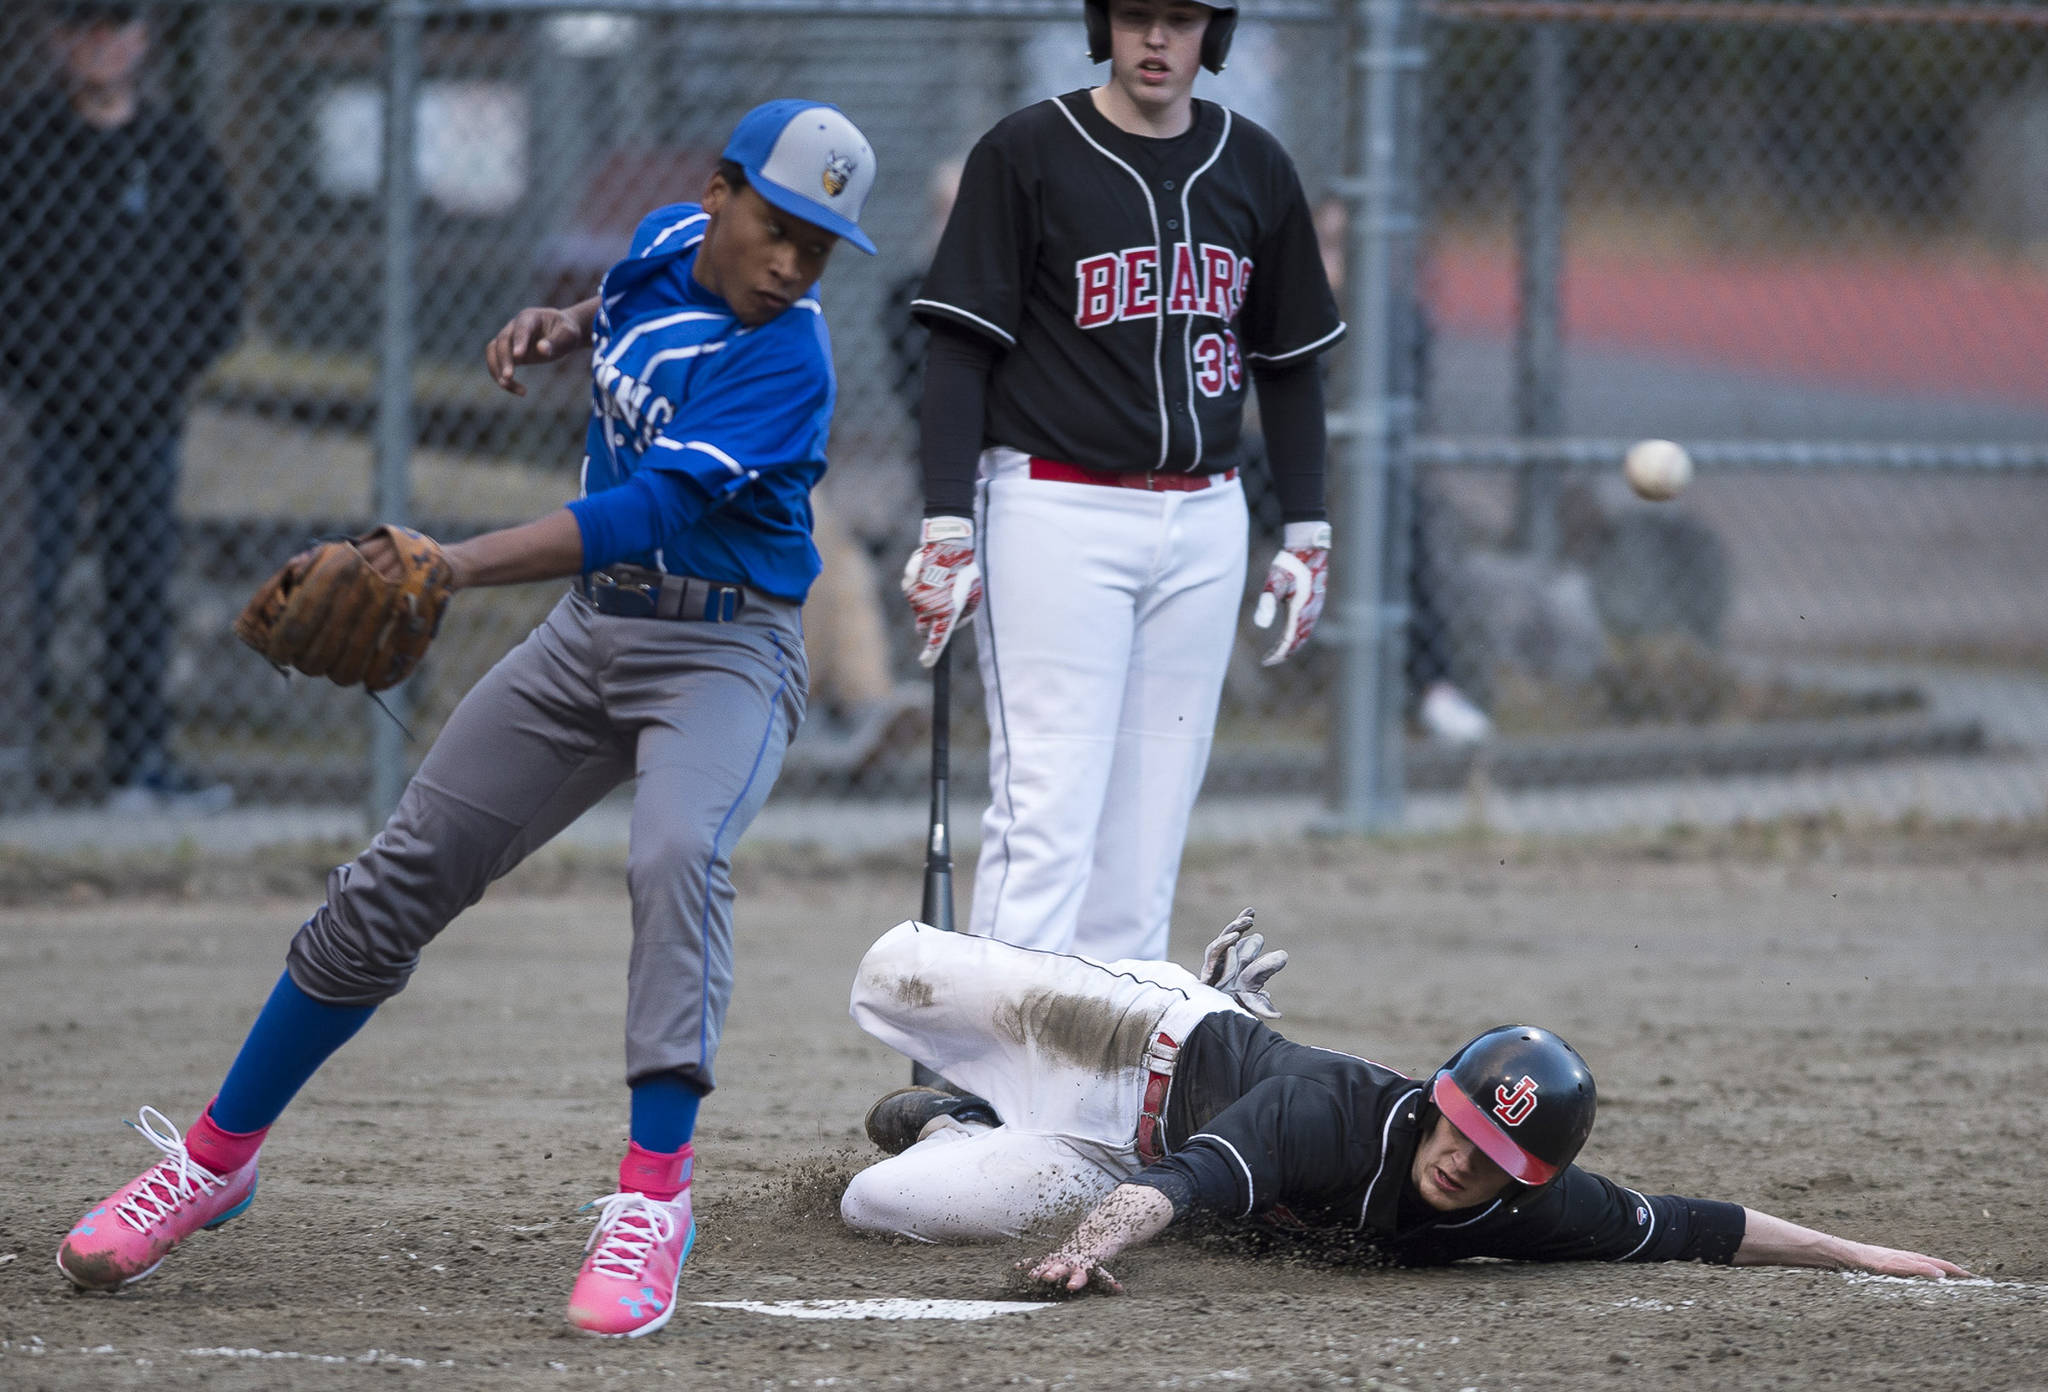 Juneau-Douglas’ Jacob Dale slides to steal home and score as Petersburg’s Sawyer Bryner misses the throw at Adair-Kennedy Memorial Park on Friday, April 27, 2018. (Michael Penn | Juneau Empire)